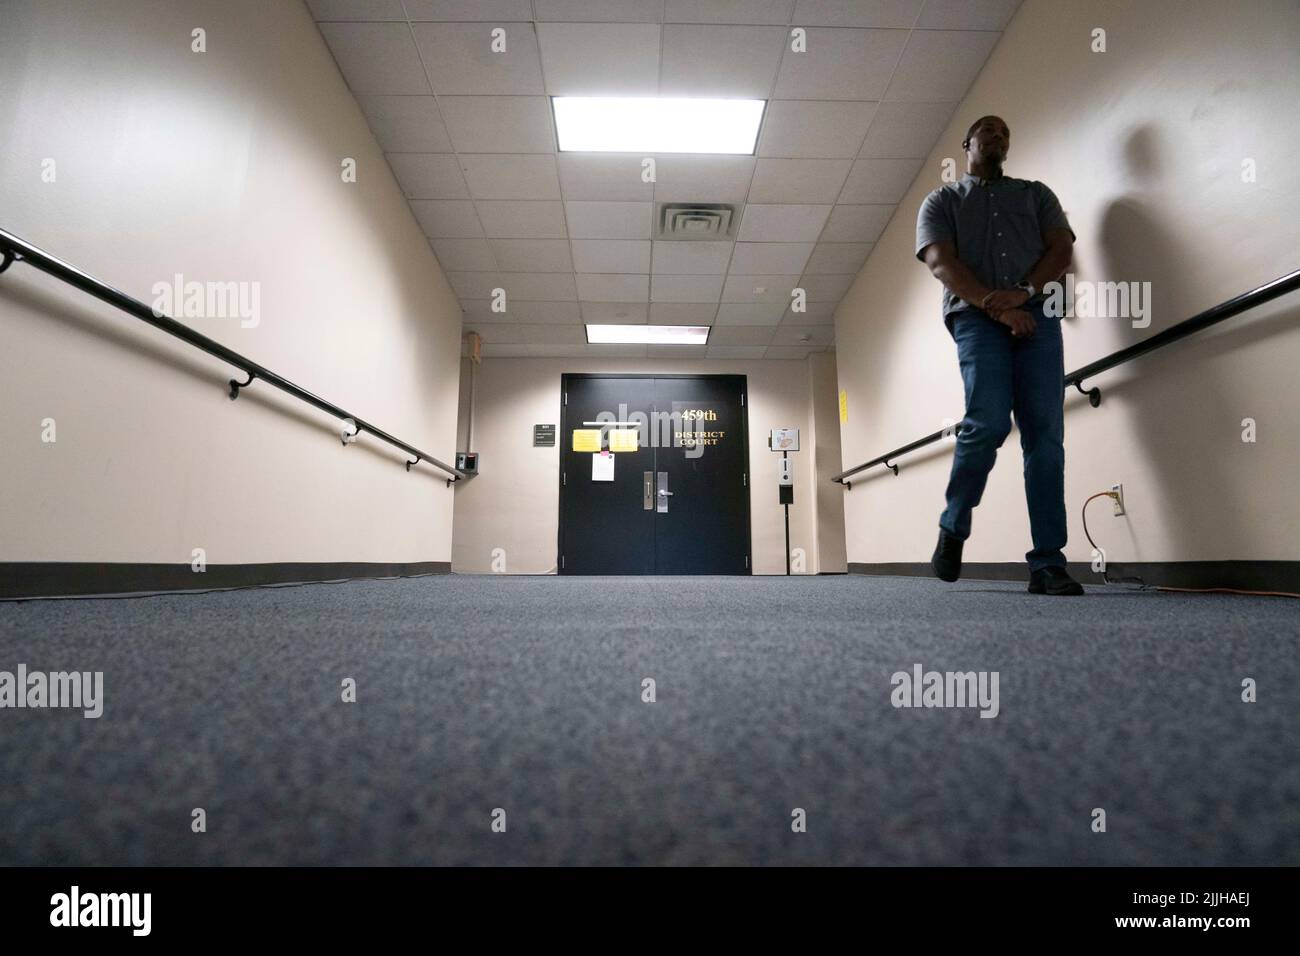 Austin Texas USA, July 26 2022: A lone security guard stands outside the 459th District Courtroom of Judge Maya Guerra Gamble on the first day of InfoWars' Alex Jones (not shown) defamation trail. The case centers on the damages Jones will have to pay victims in the 2012 Sandy Hook school massacre. Credit: Bob Daemmrich/Alamy Live News Stock Photo